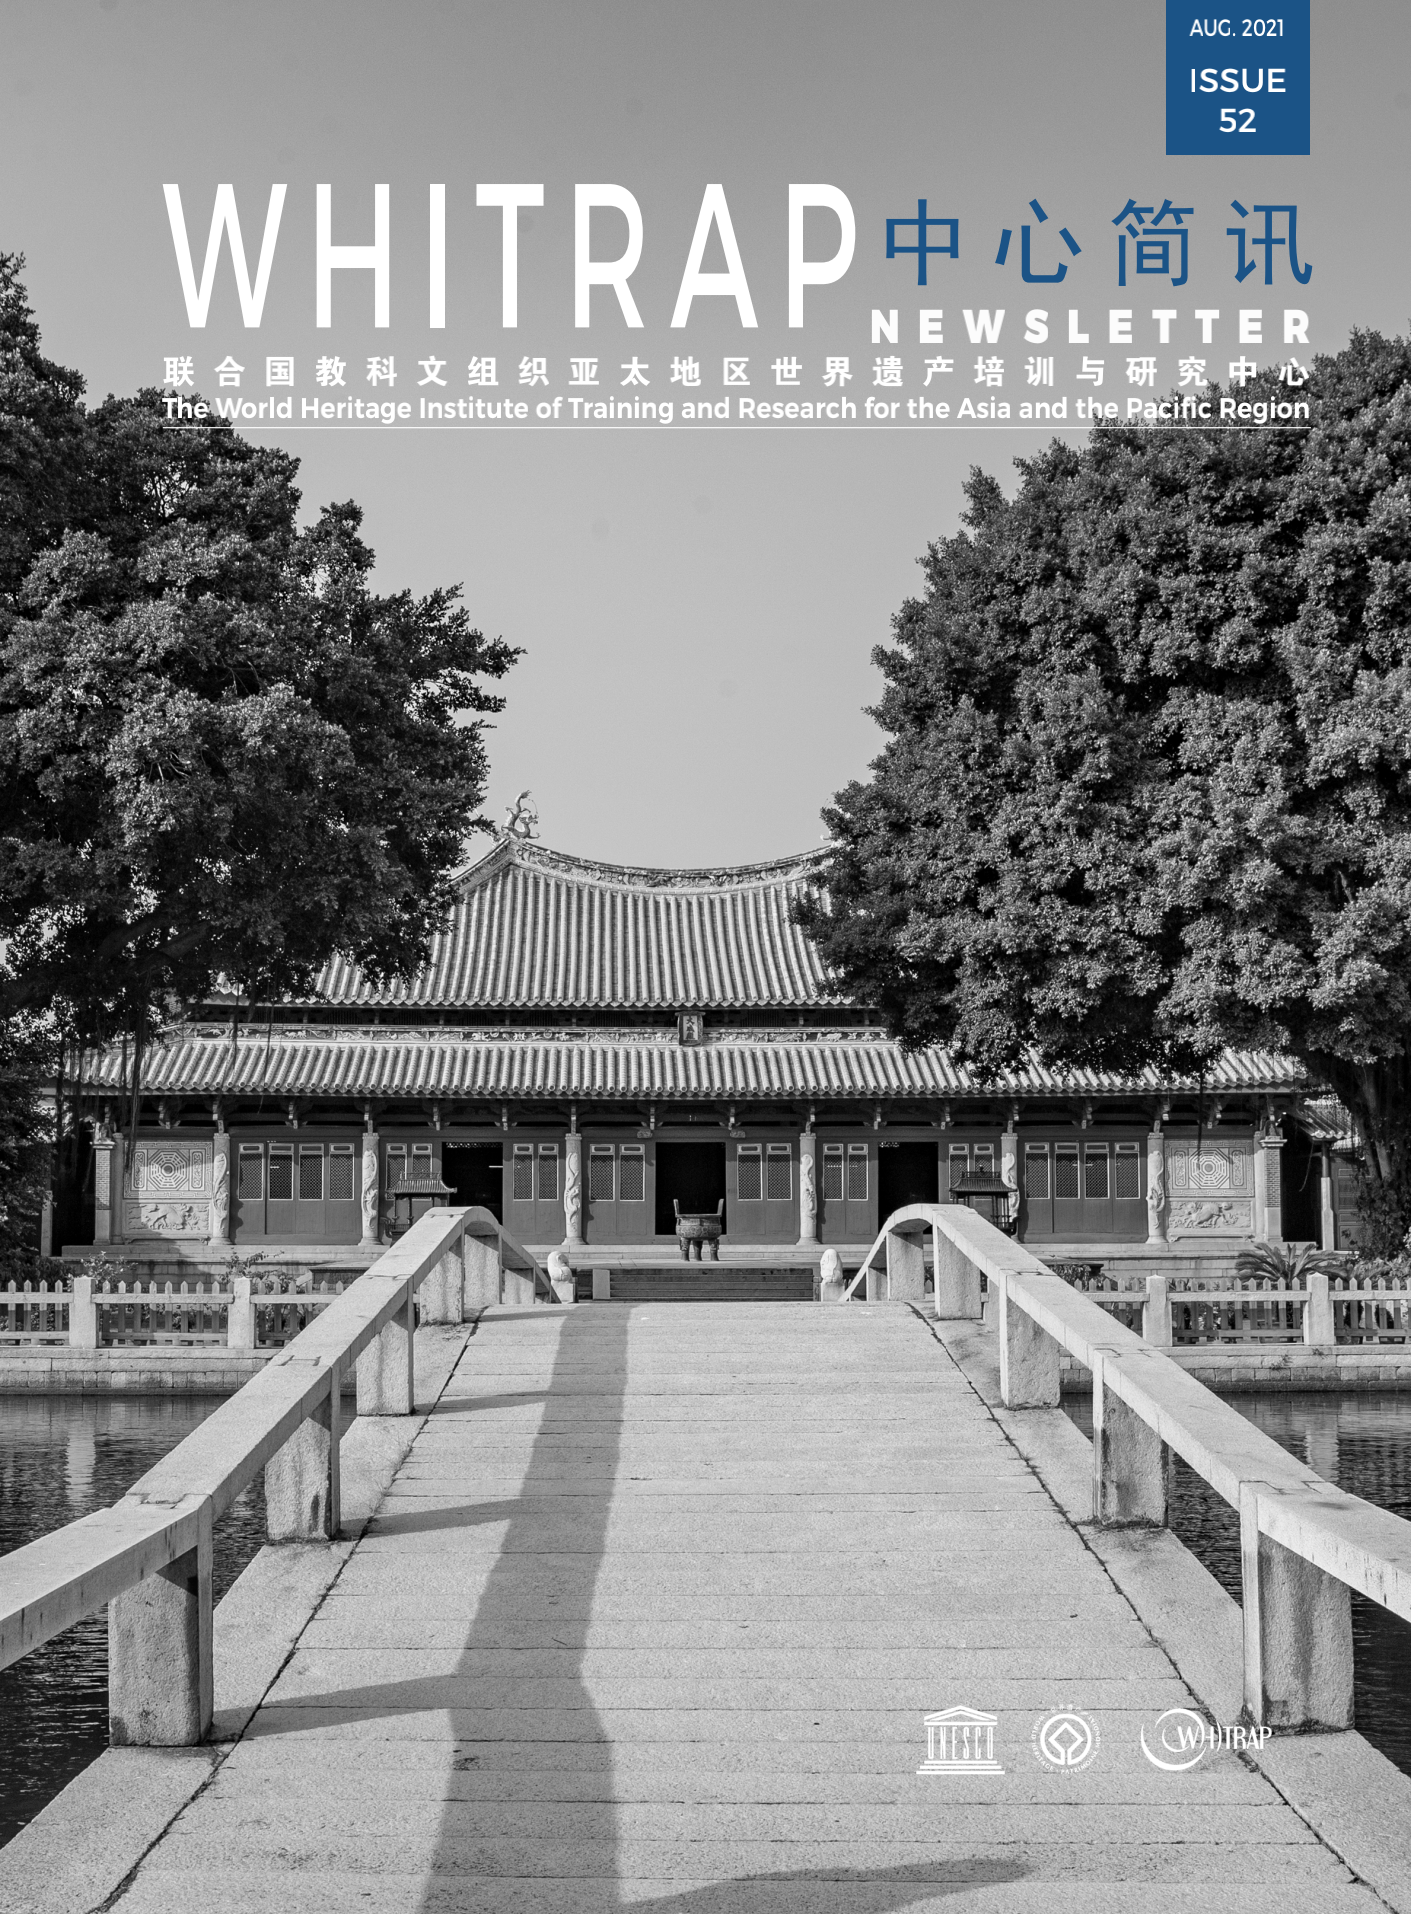 WHITRAP Newsletter (Issue 52)